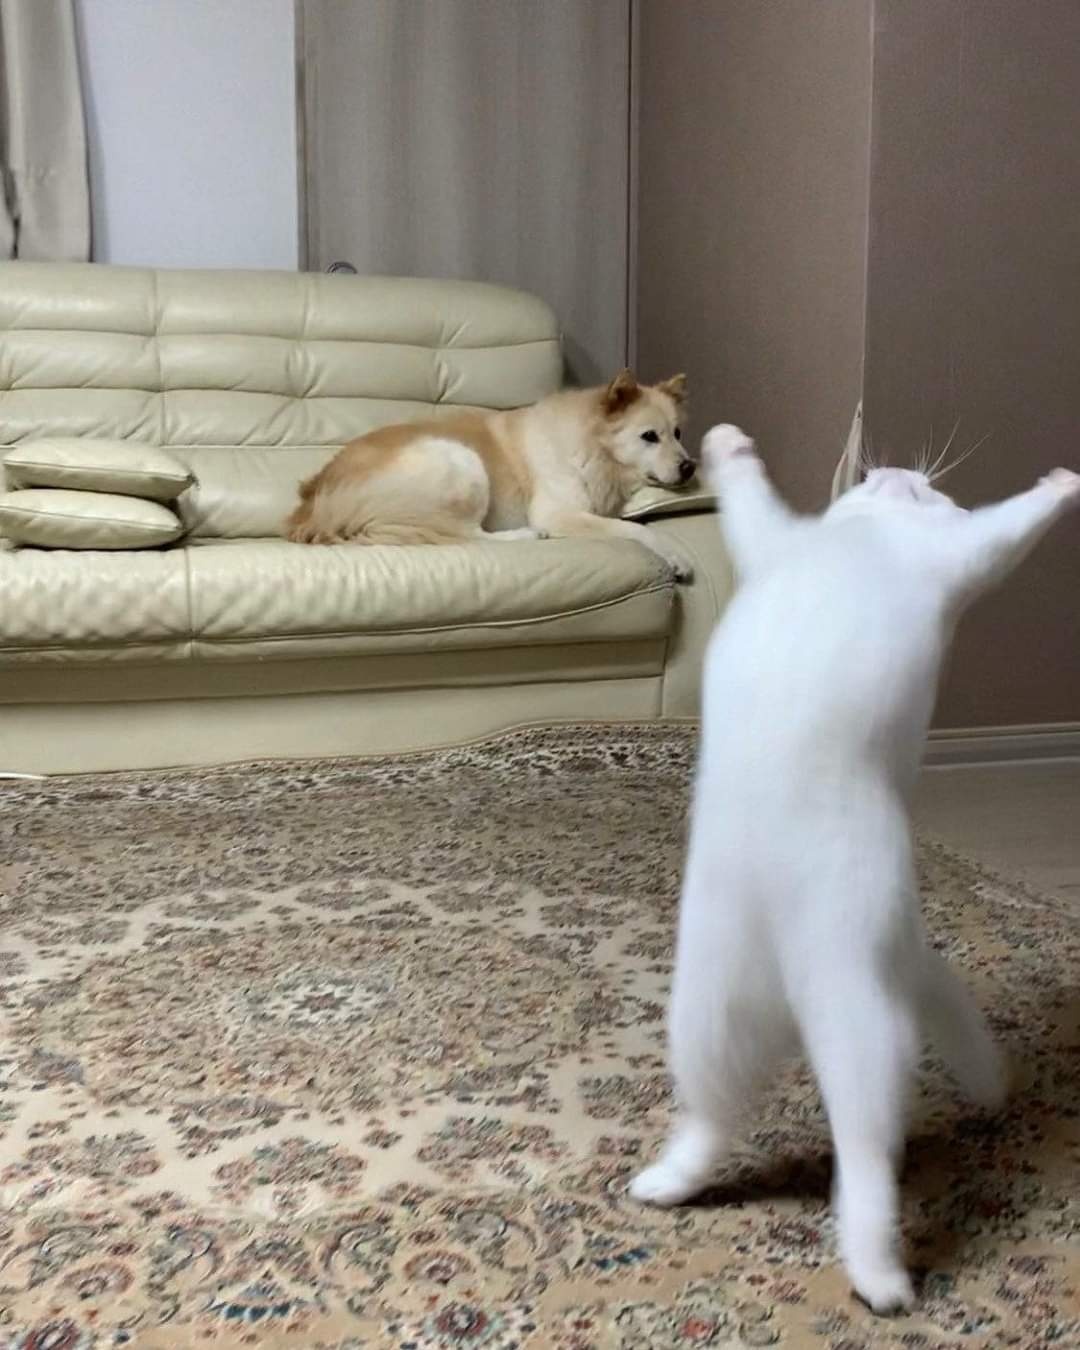 cat acting like gymnast with a dog in the background